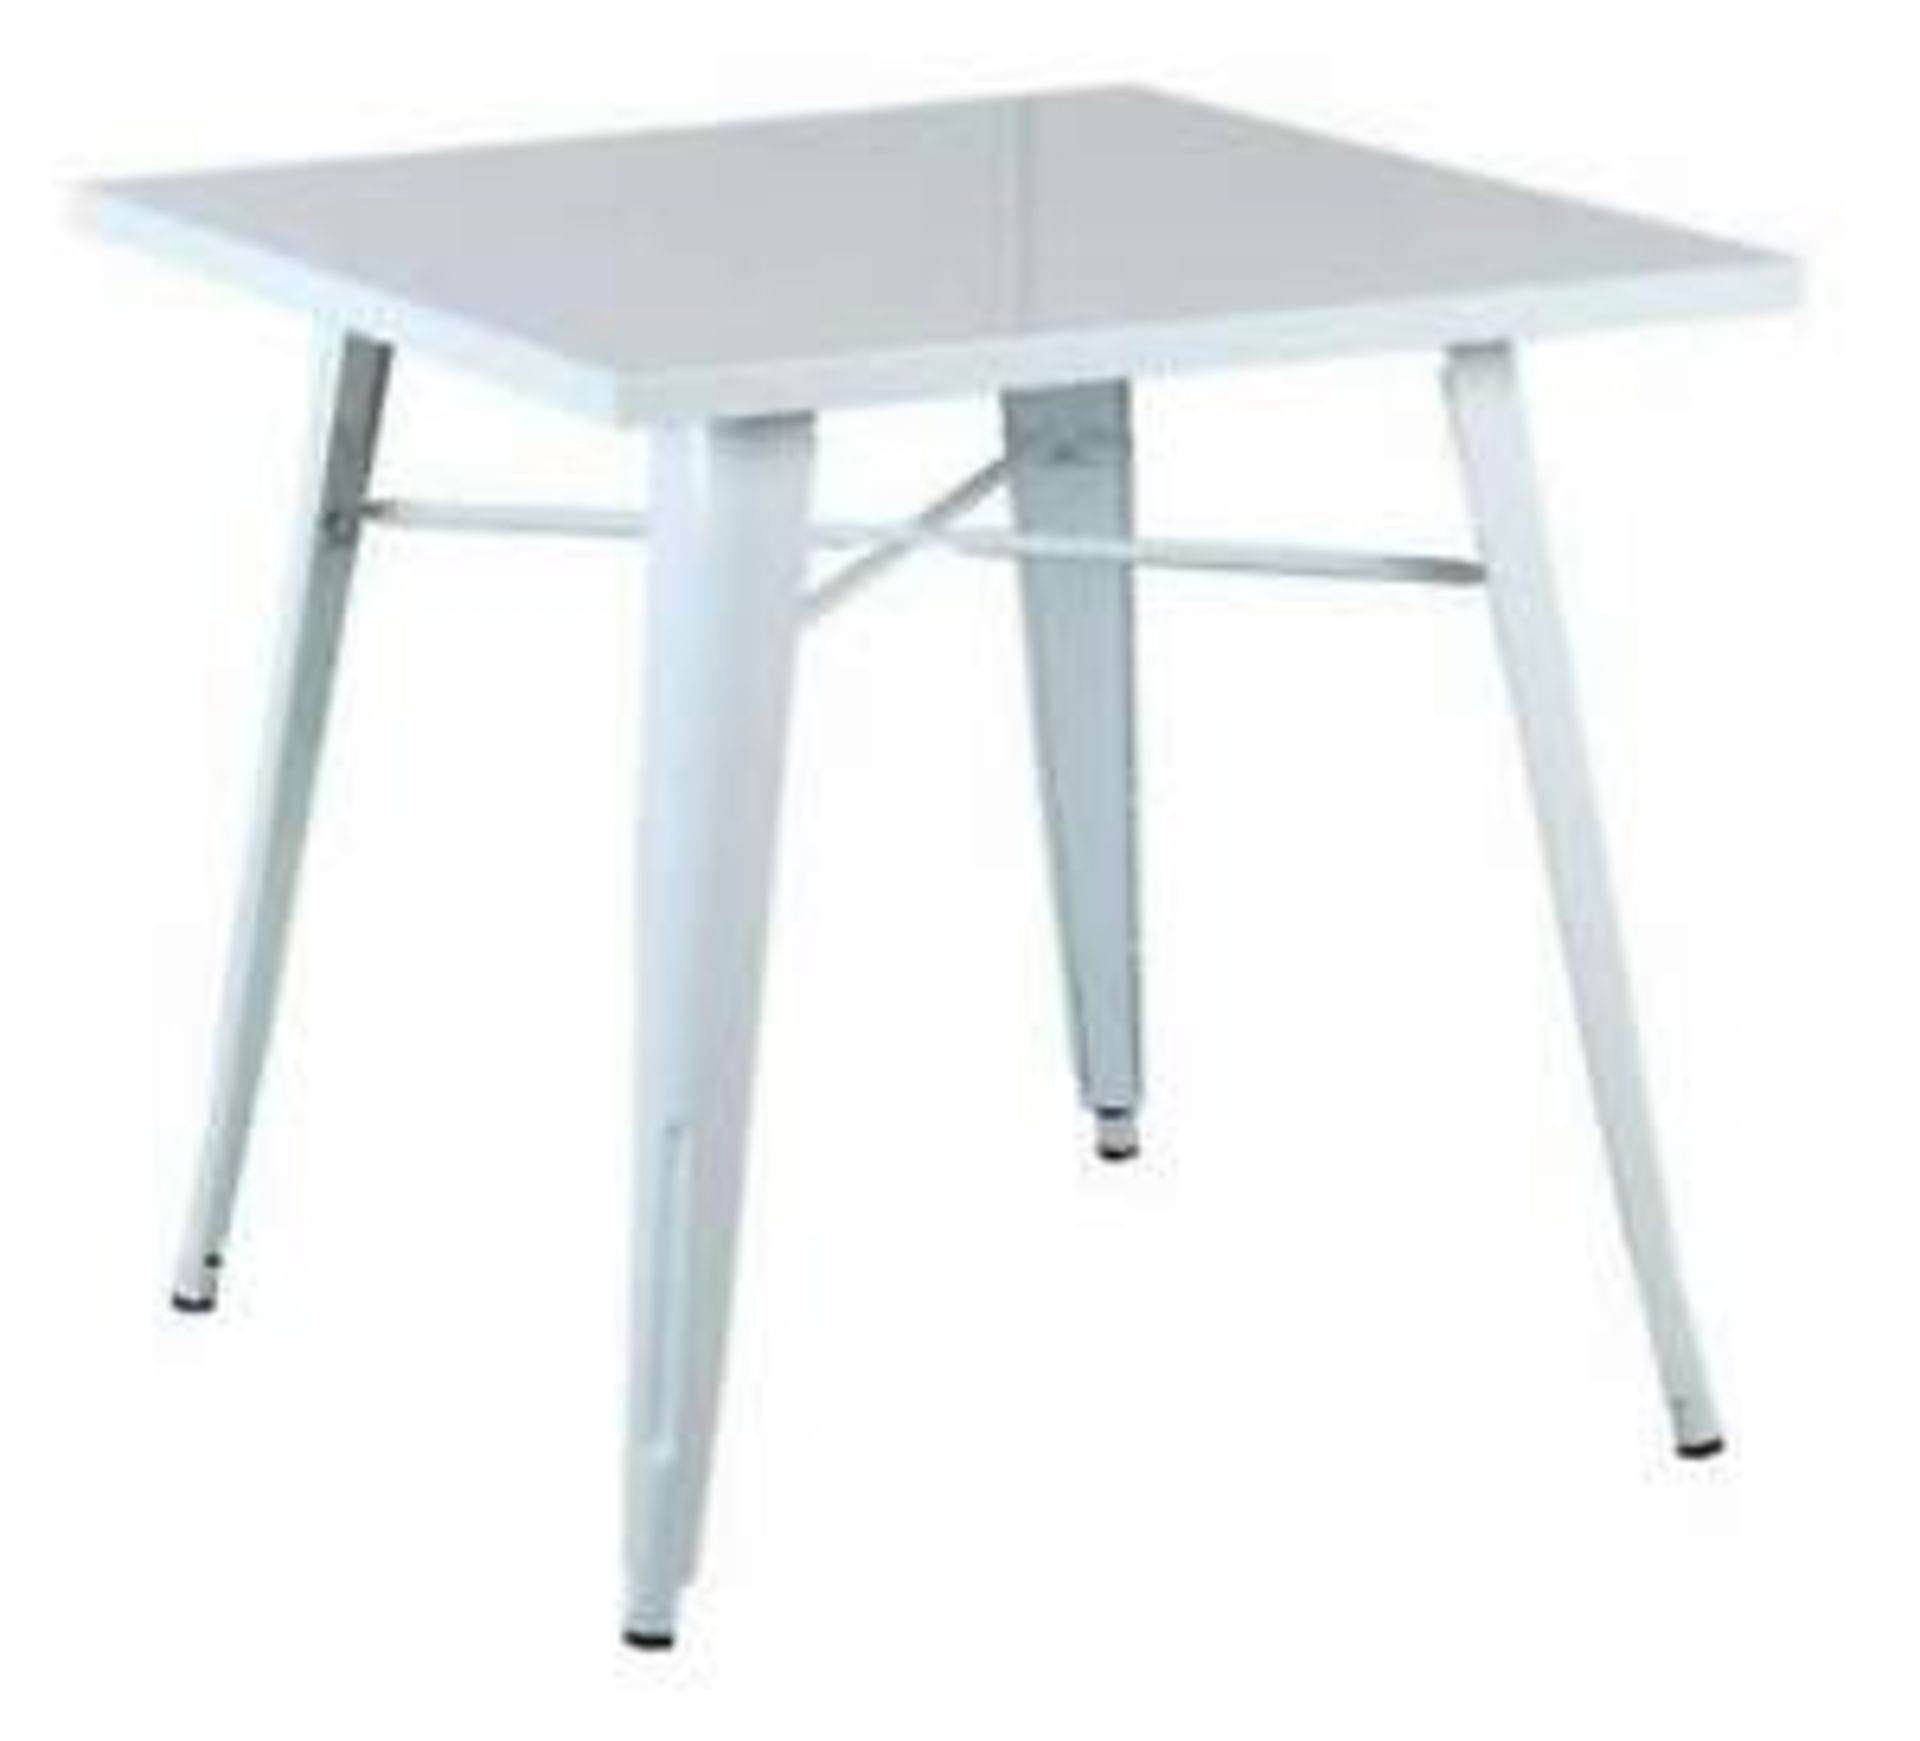 1 x Tolix Industrial Style Outdoor Bistro Table and Chair Set in White- Includes 1 x Table and 4 x - Image 3 of 14